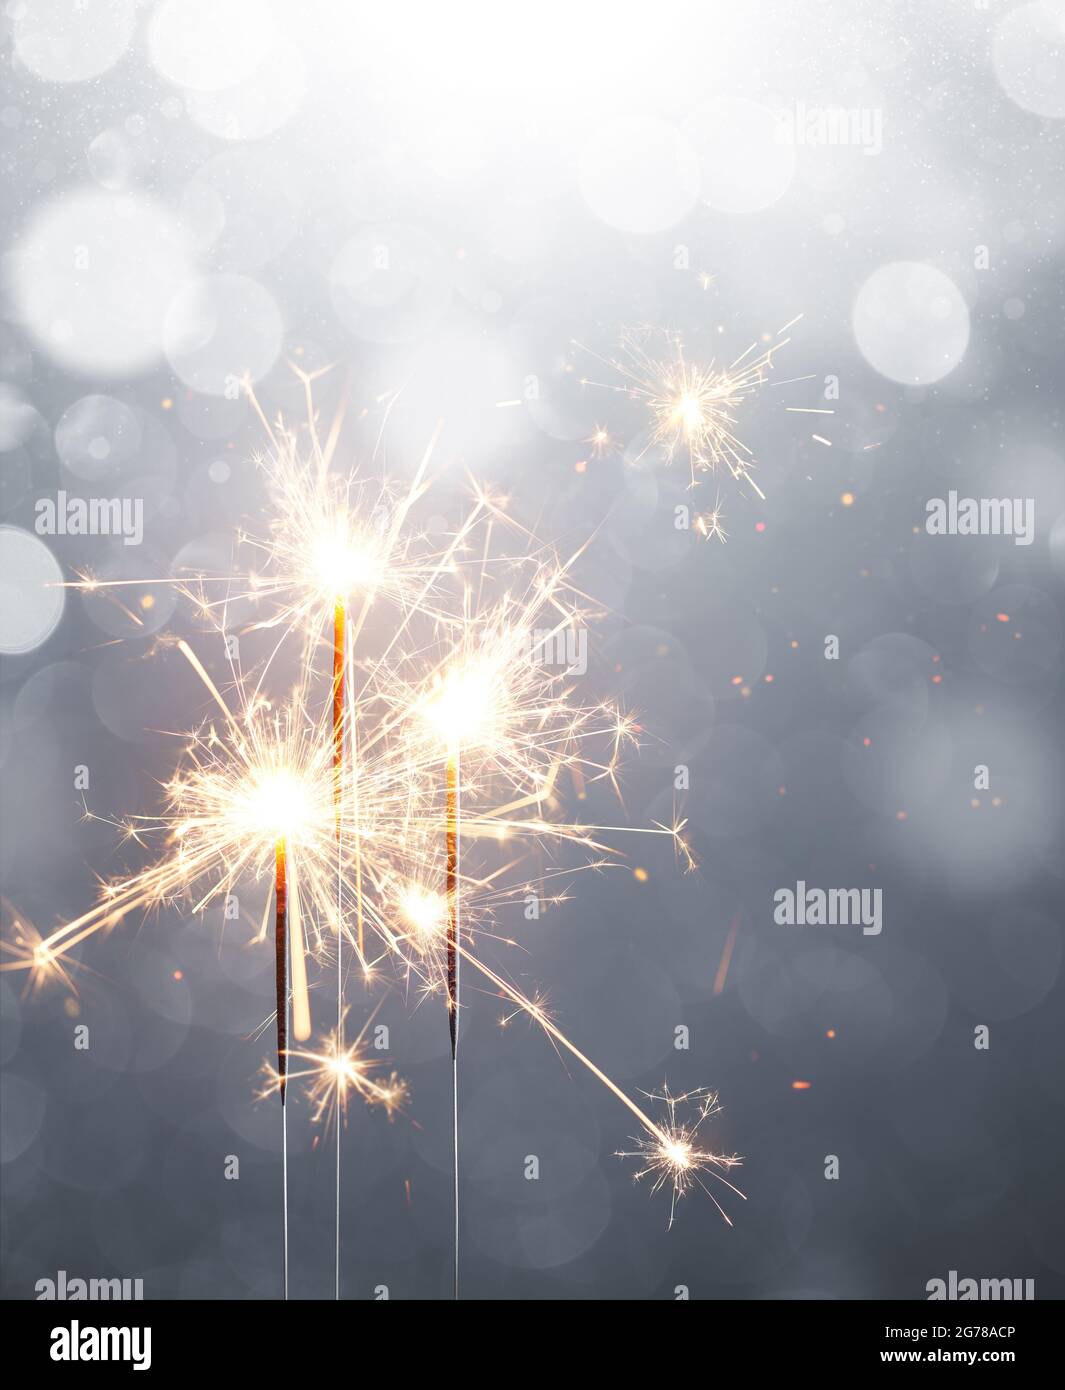 Glittering sparklers, Merry Christmas and Happy New Year Stock Photo